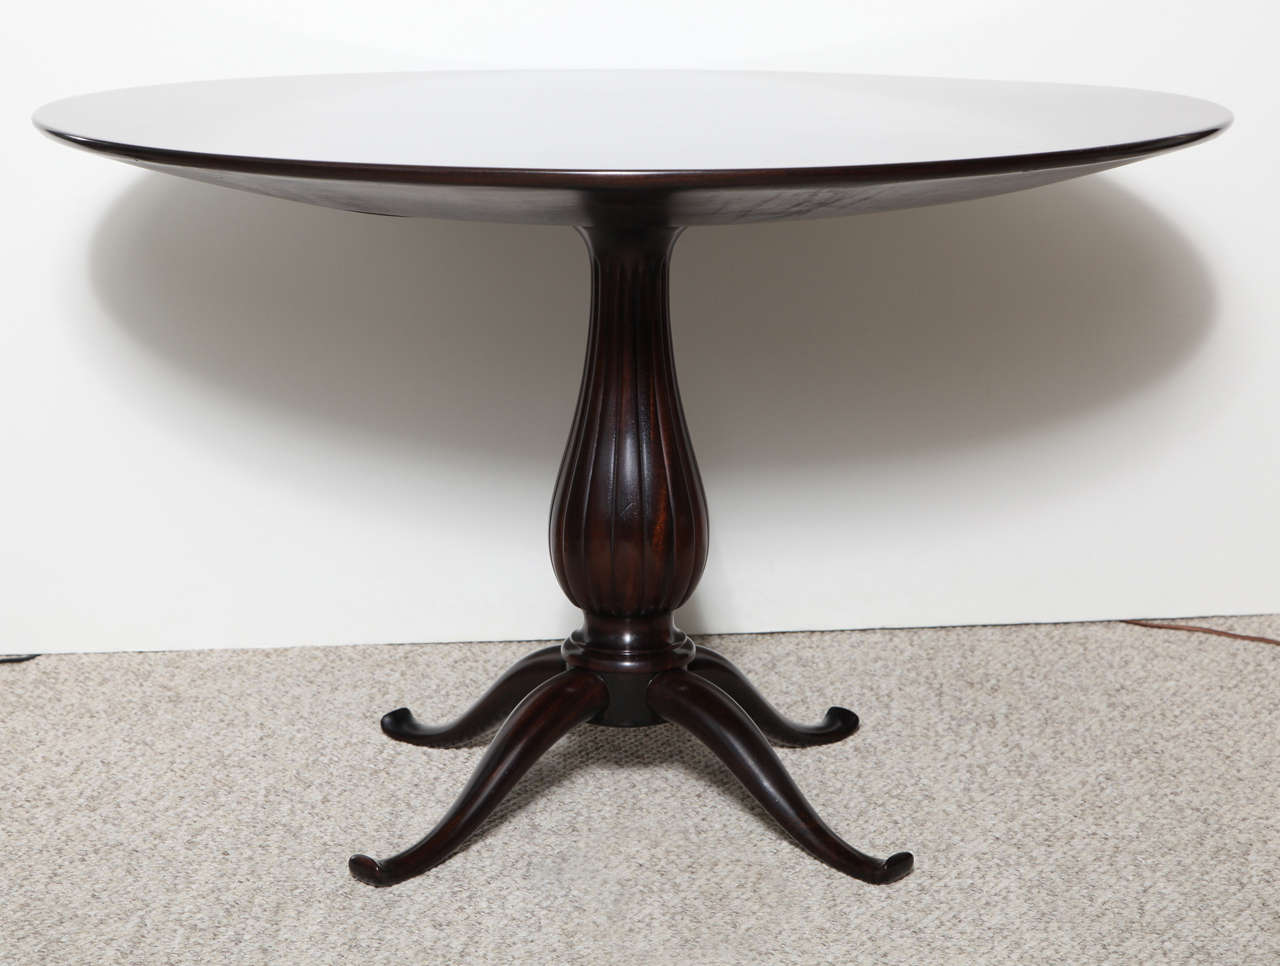 Mahogany top with inlaid star-burst pattern.  Pedestal base with carved bulbous center piece the evolves into four graciously curved feet.